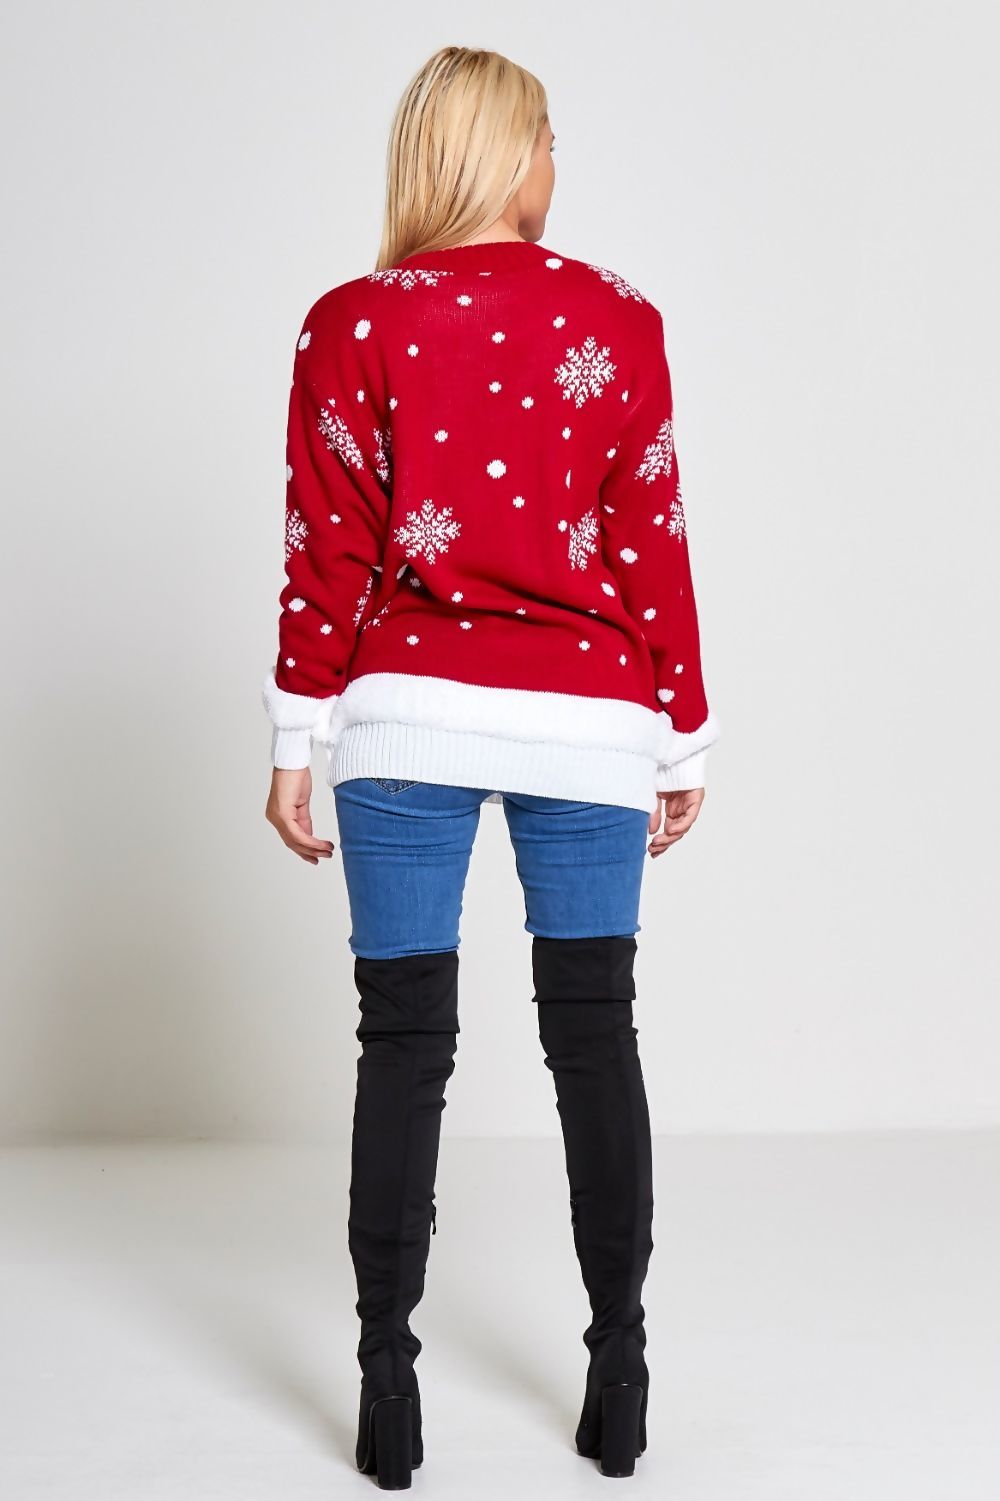 WOMENS MERRY CHRISTMAS REINDEER KNITTED JUMPER RED